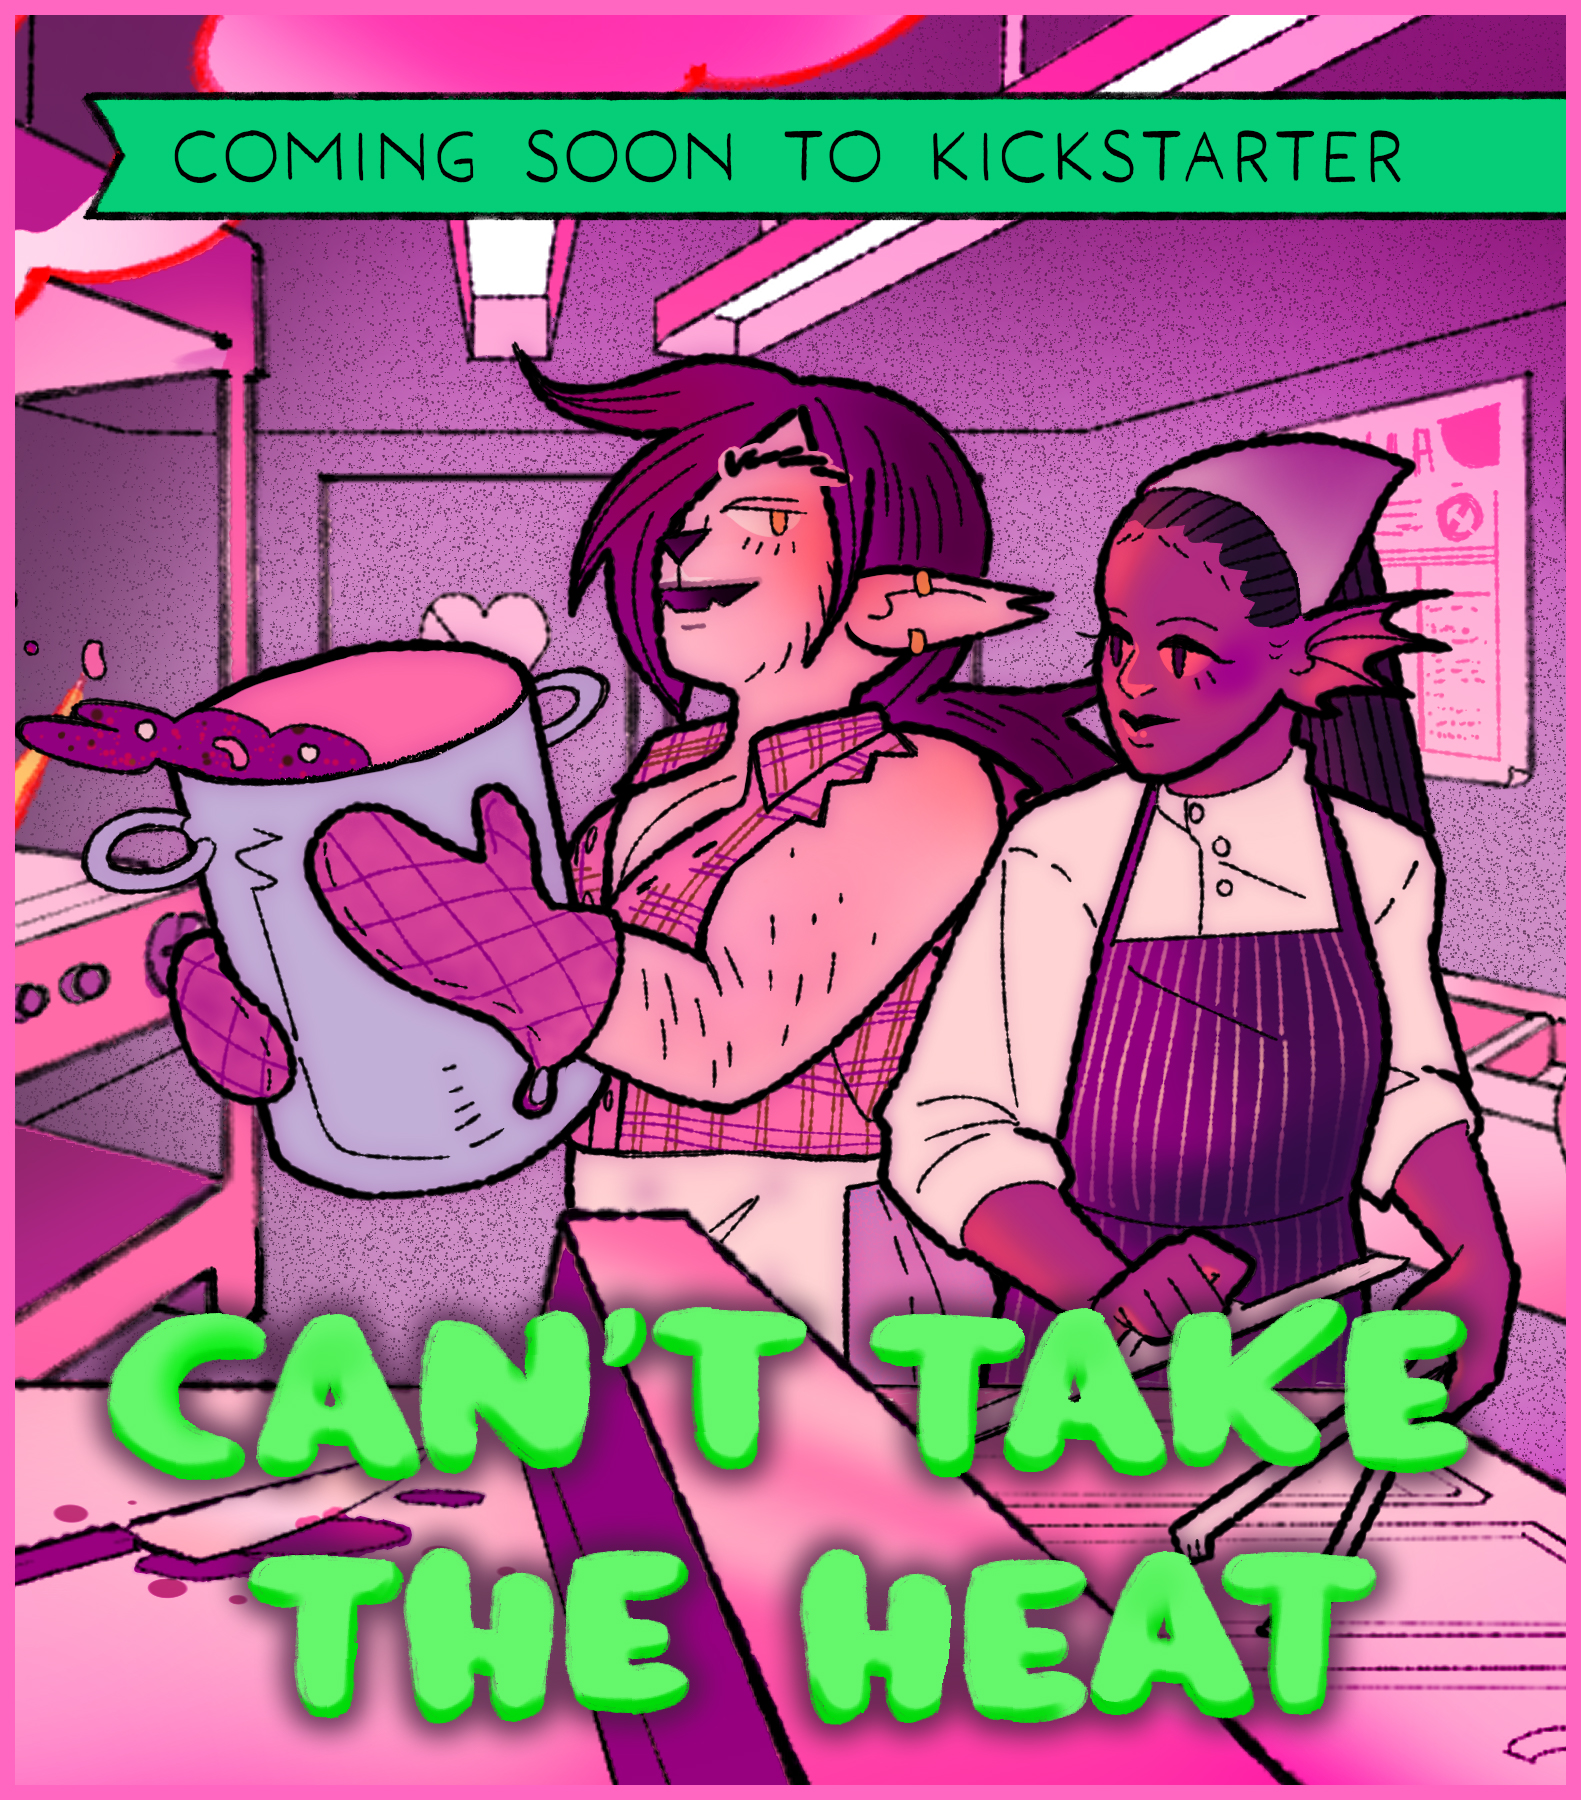 Coming soon to Kickstarter. Can't Take The Heat.